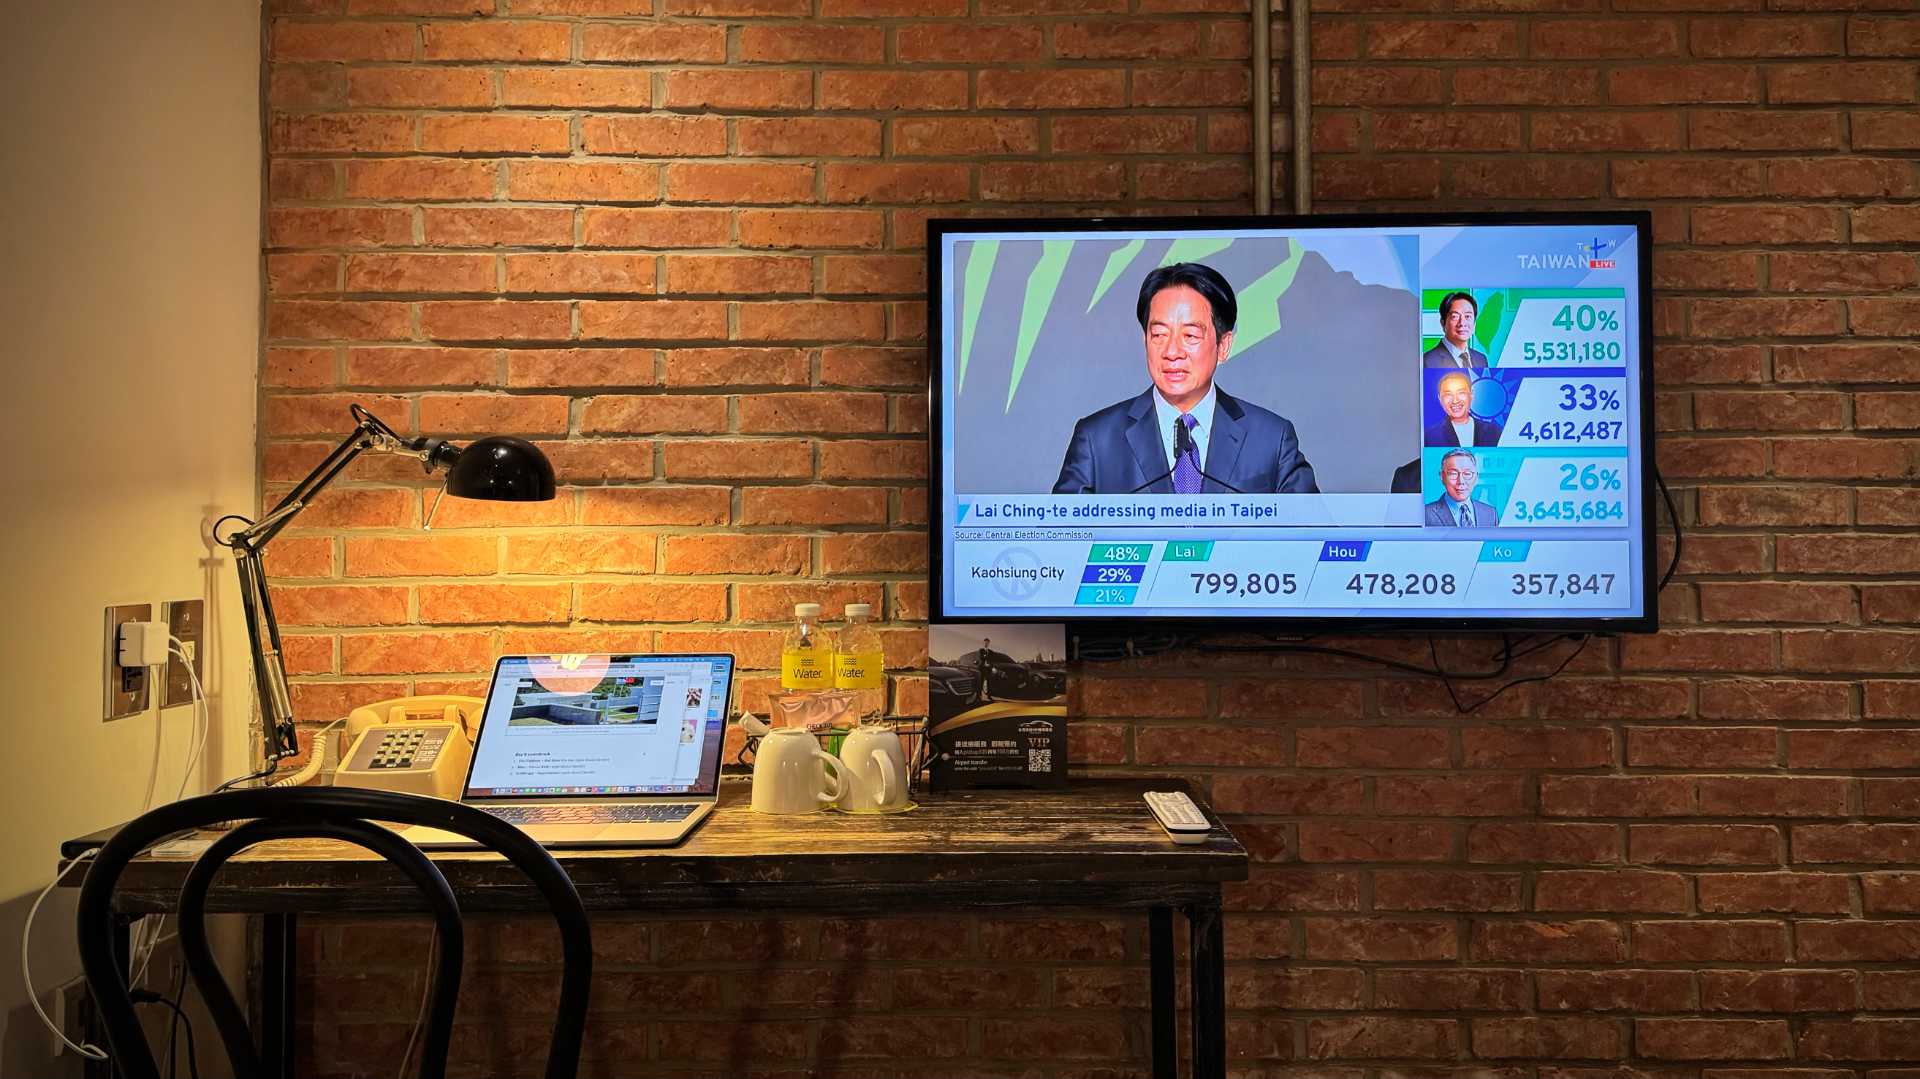 Photo of a TV in a hotel room, above a desk. The TV is displaying TaiwanPlus coverage of the 2024 Taiwan presidential election. President-elect Lai Ching-Te is speaking. To the right of the screen, the results show he has 40% of the vote, with his opponents having 33% and 26%.